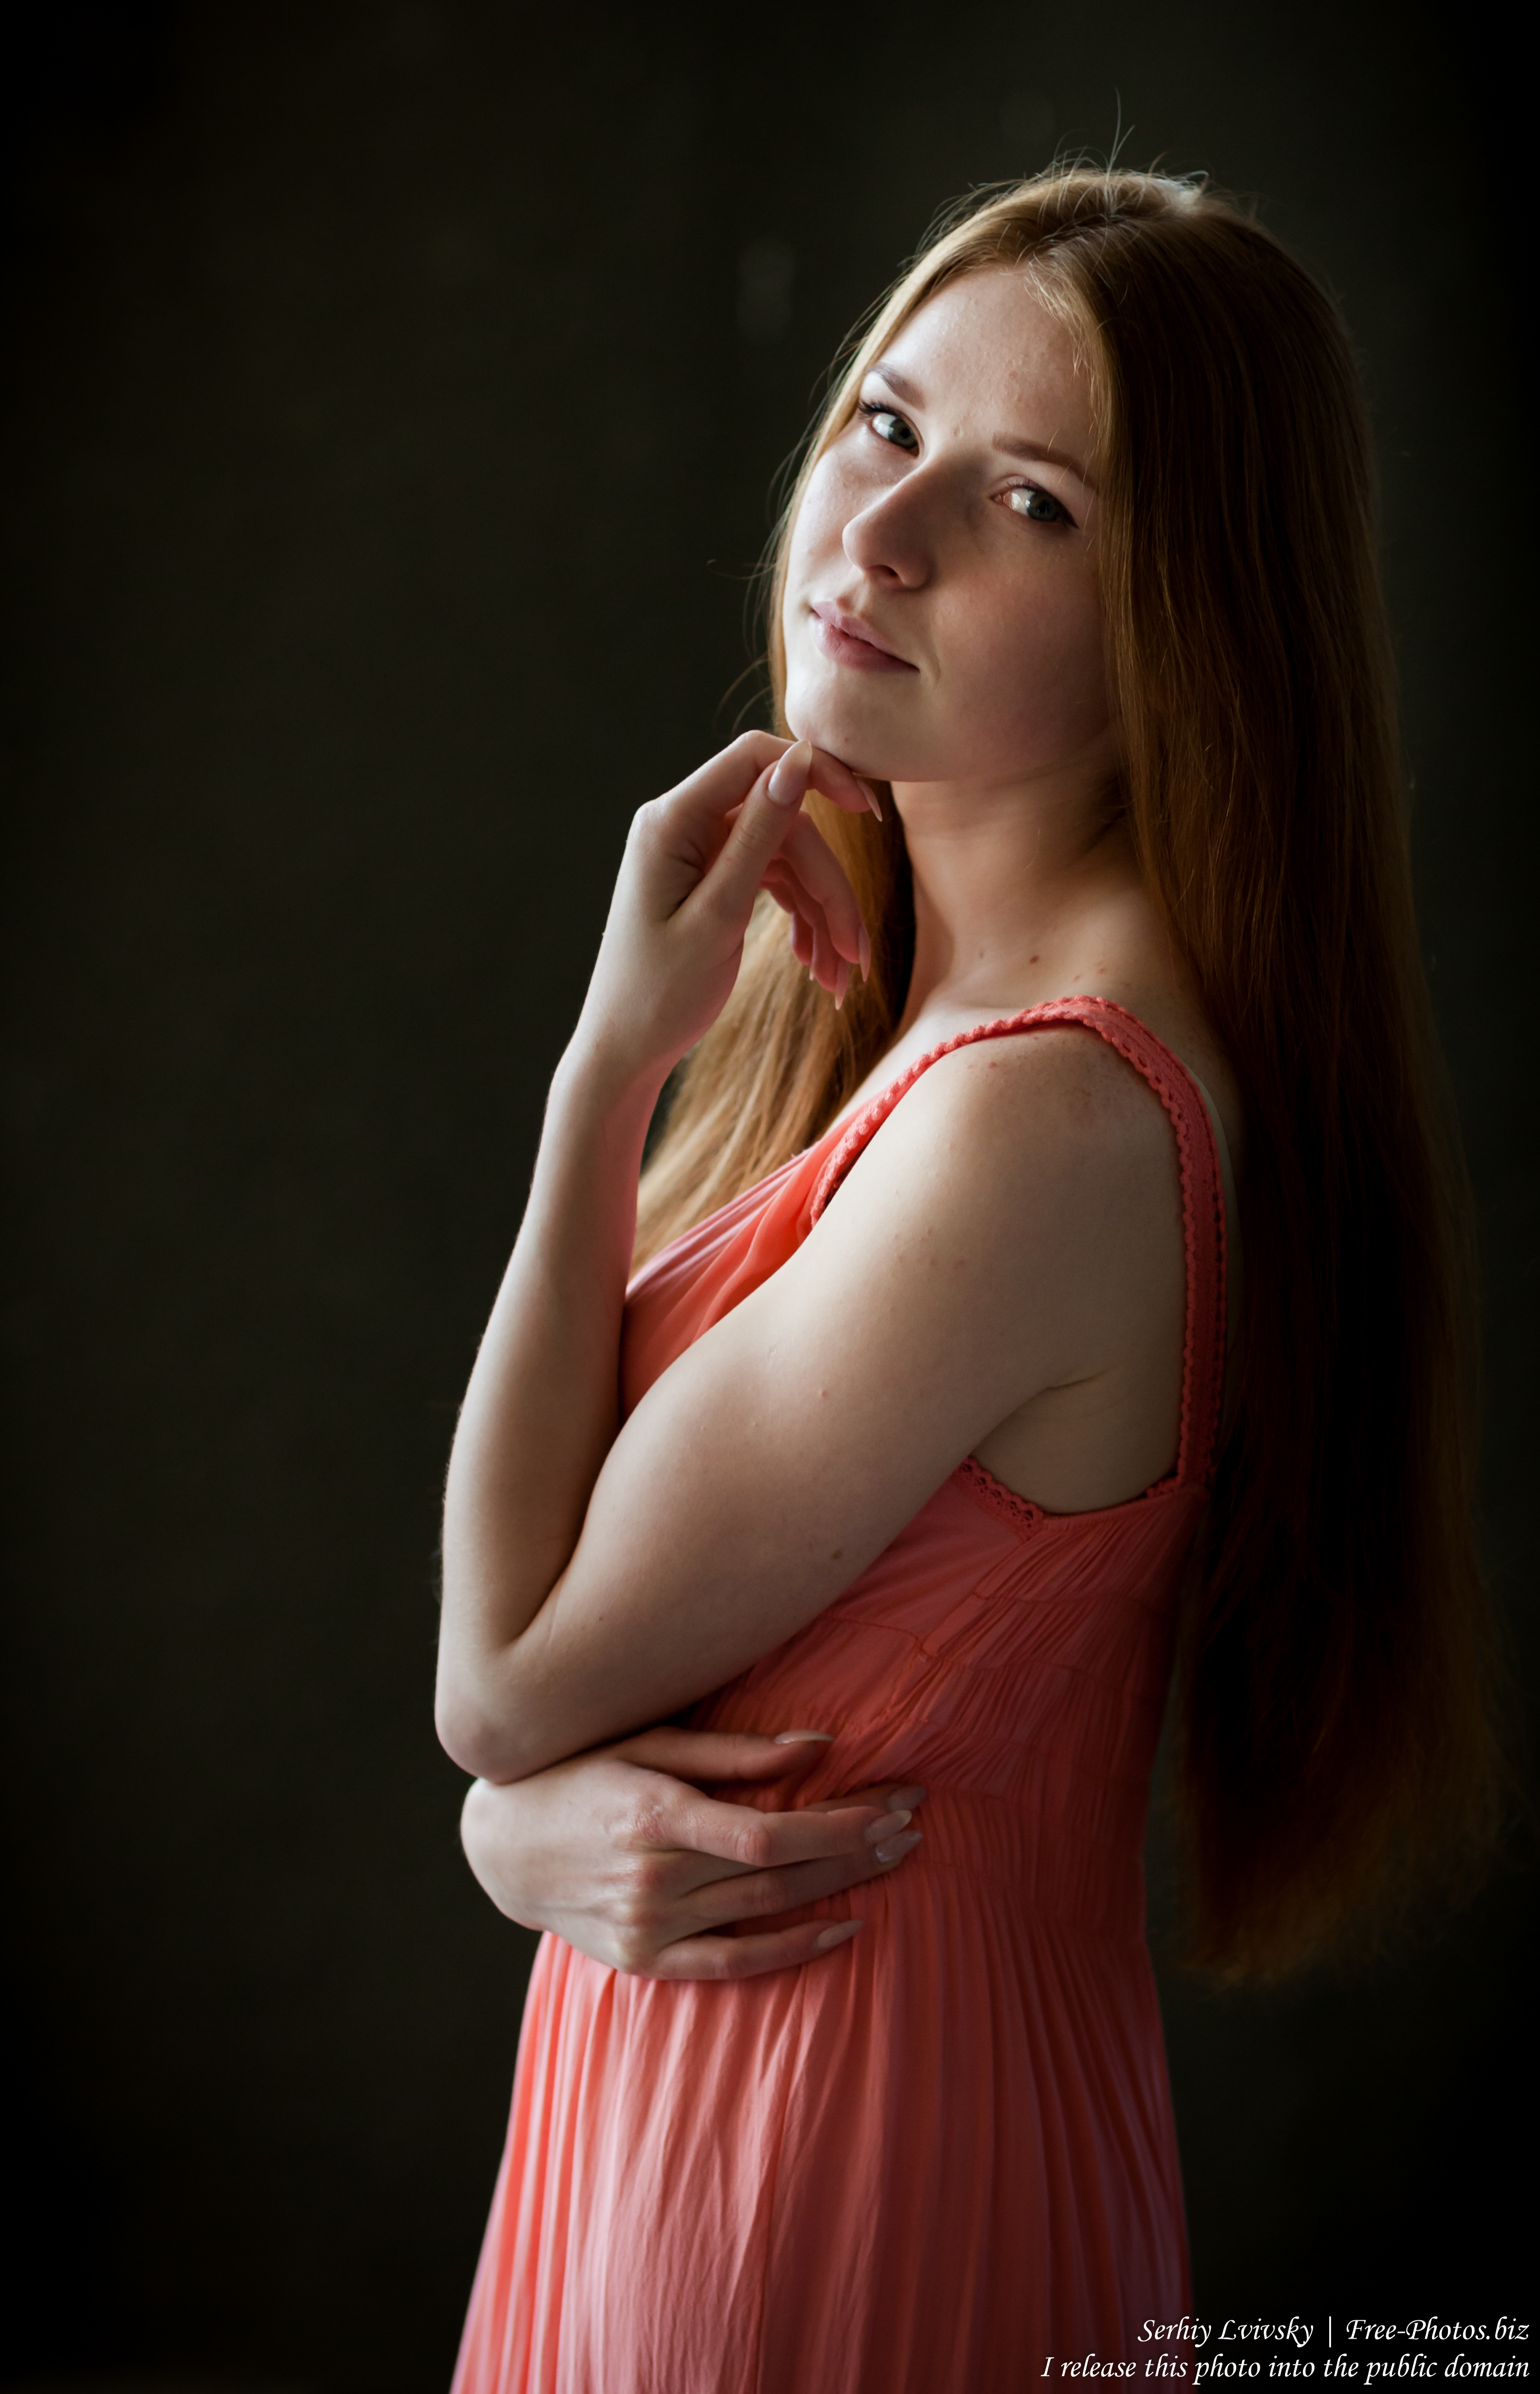 Yana - a 23-year-old girl with natural red hair photographed in June 2017 by Serhiy Lvivsky, picture 1